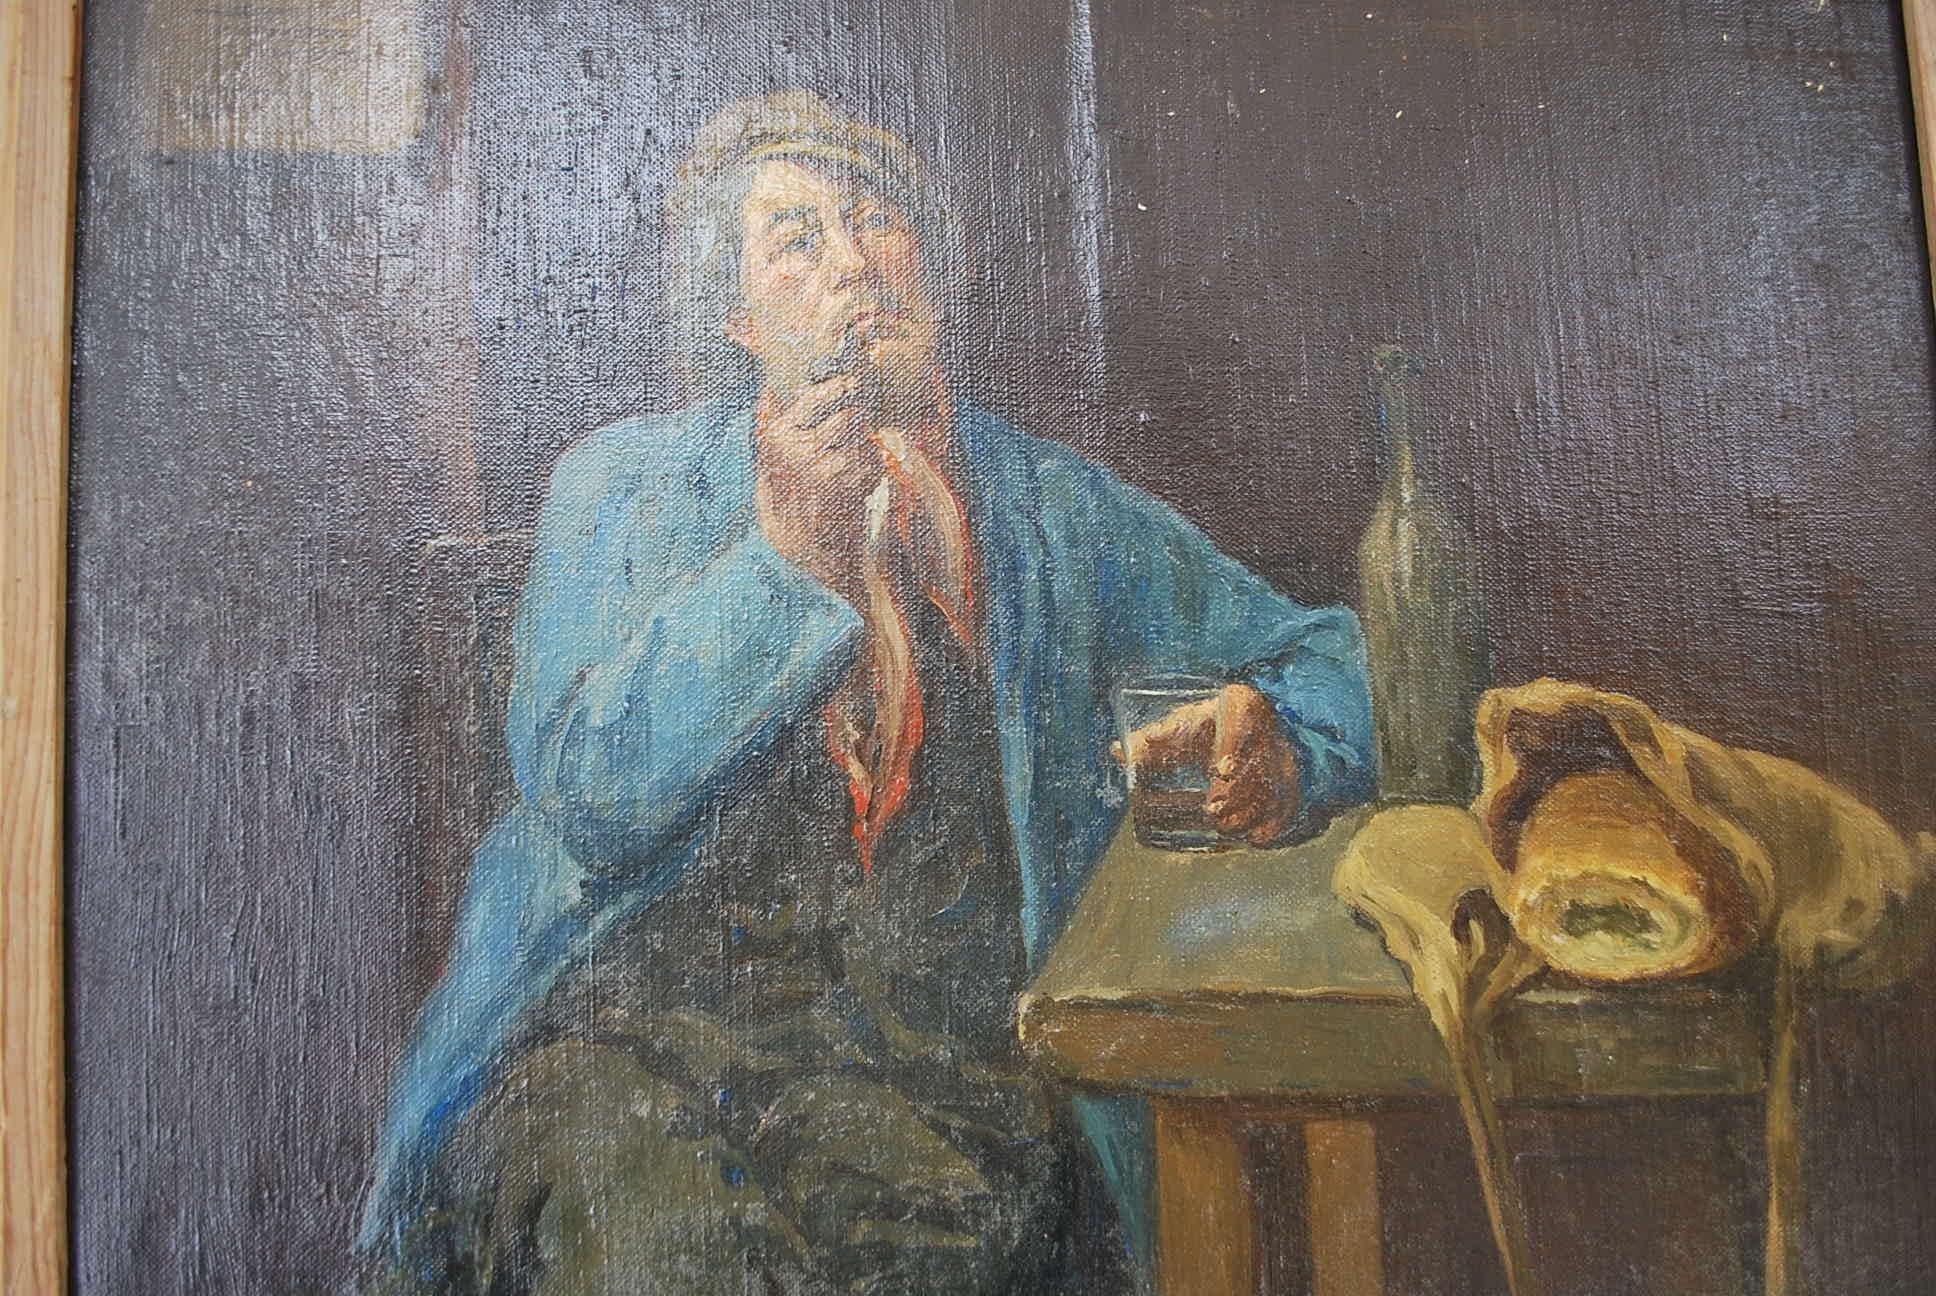 This is an antique oil on canvas painting of a French man enjoying his wine and baguette. Signed at bottom left corner Henri Breard. 
Henri Georges Breard is a French visual artist who was born in 1873.